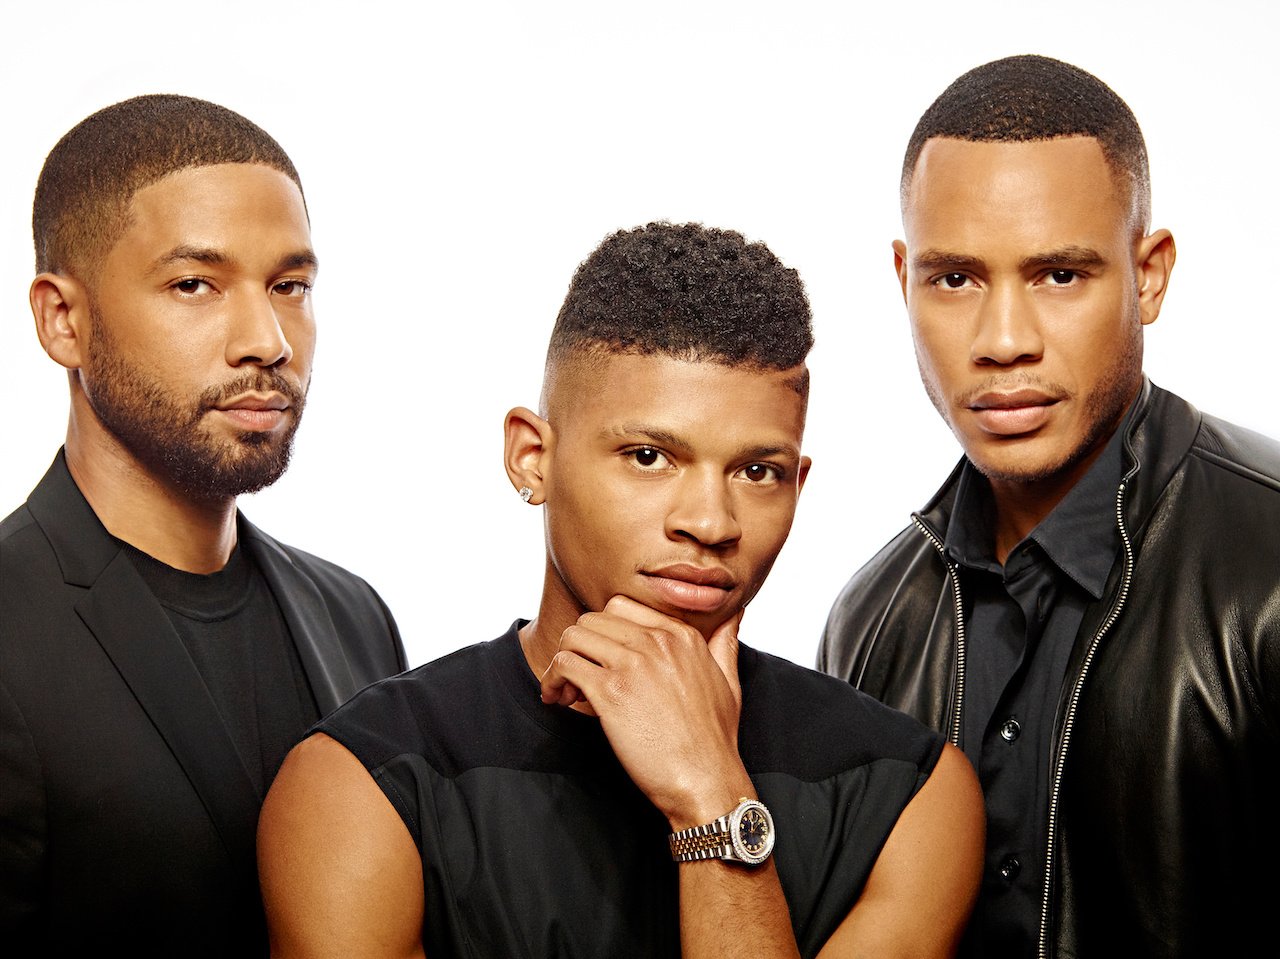 'Empire' cast Jussie Smollett, Bryshere Gray, and Trai Byers pose for promotional photo; Gray was arrested for domestic violence